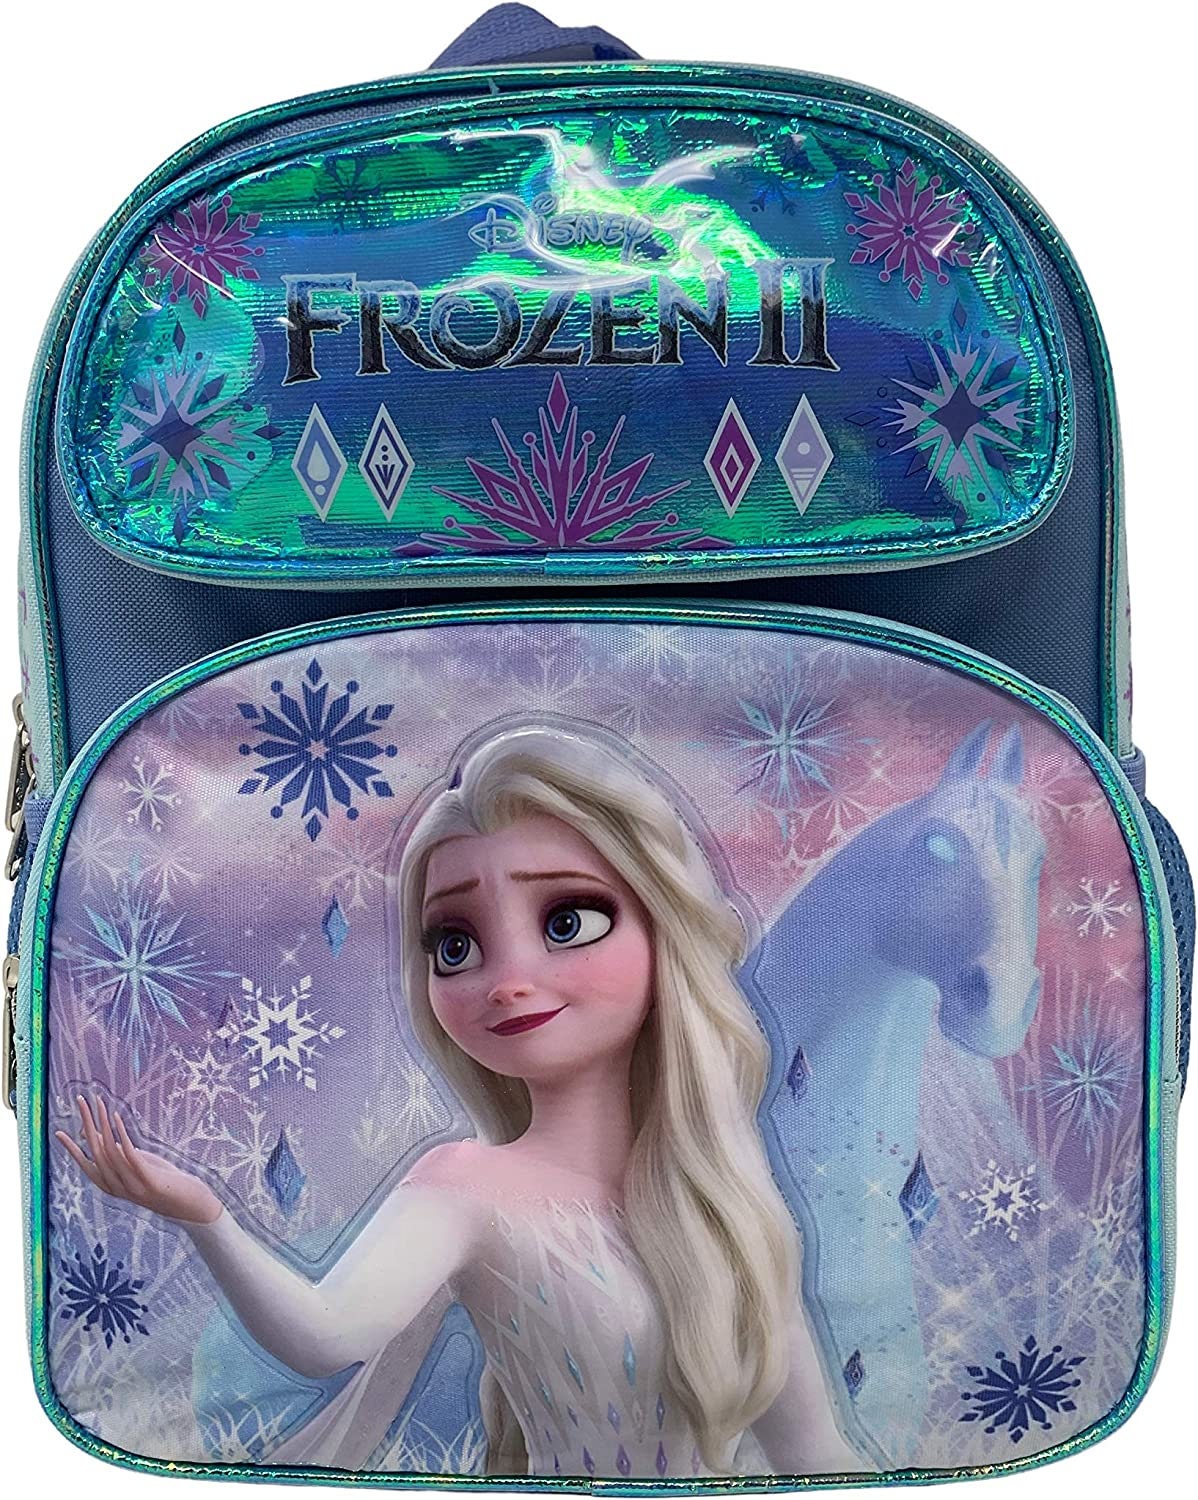 Personalized Frozen Anna & Elsa 3D Face Insulated Lunch Bag 